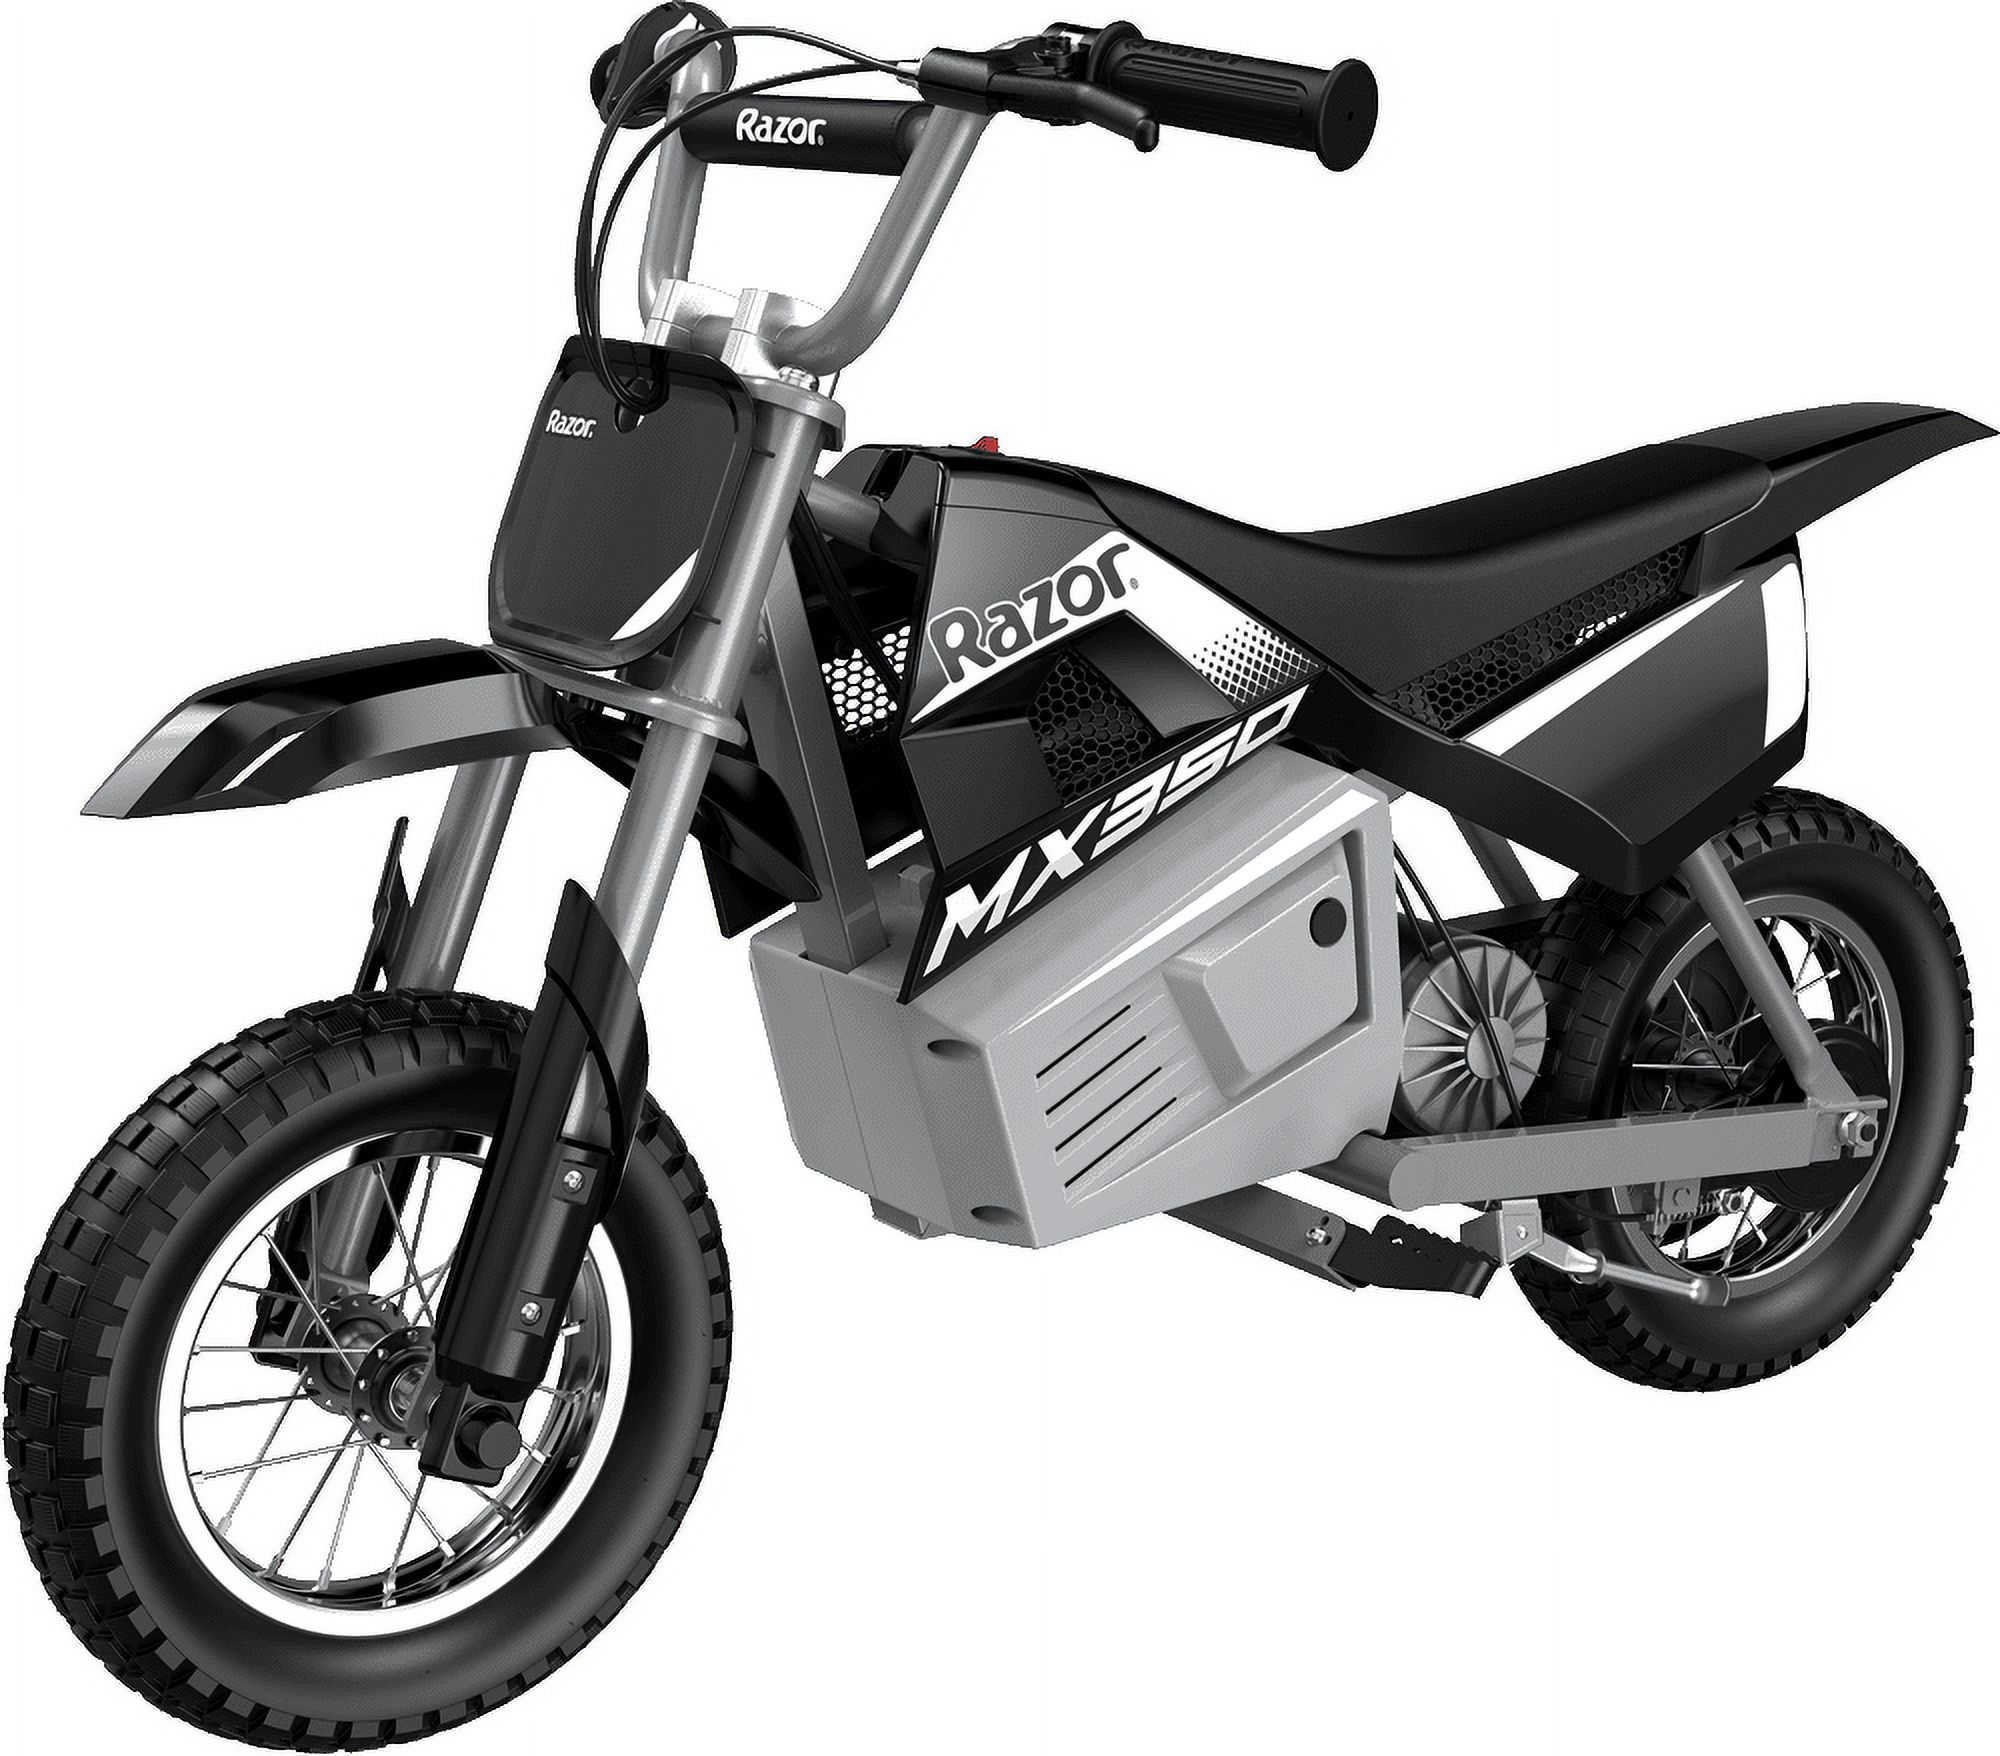 Razor Dirt Rocket MX350 - Black with Decals Included, 24V Electric-Powered Dirt Bike for Kids 13+ - image 1 of 17